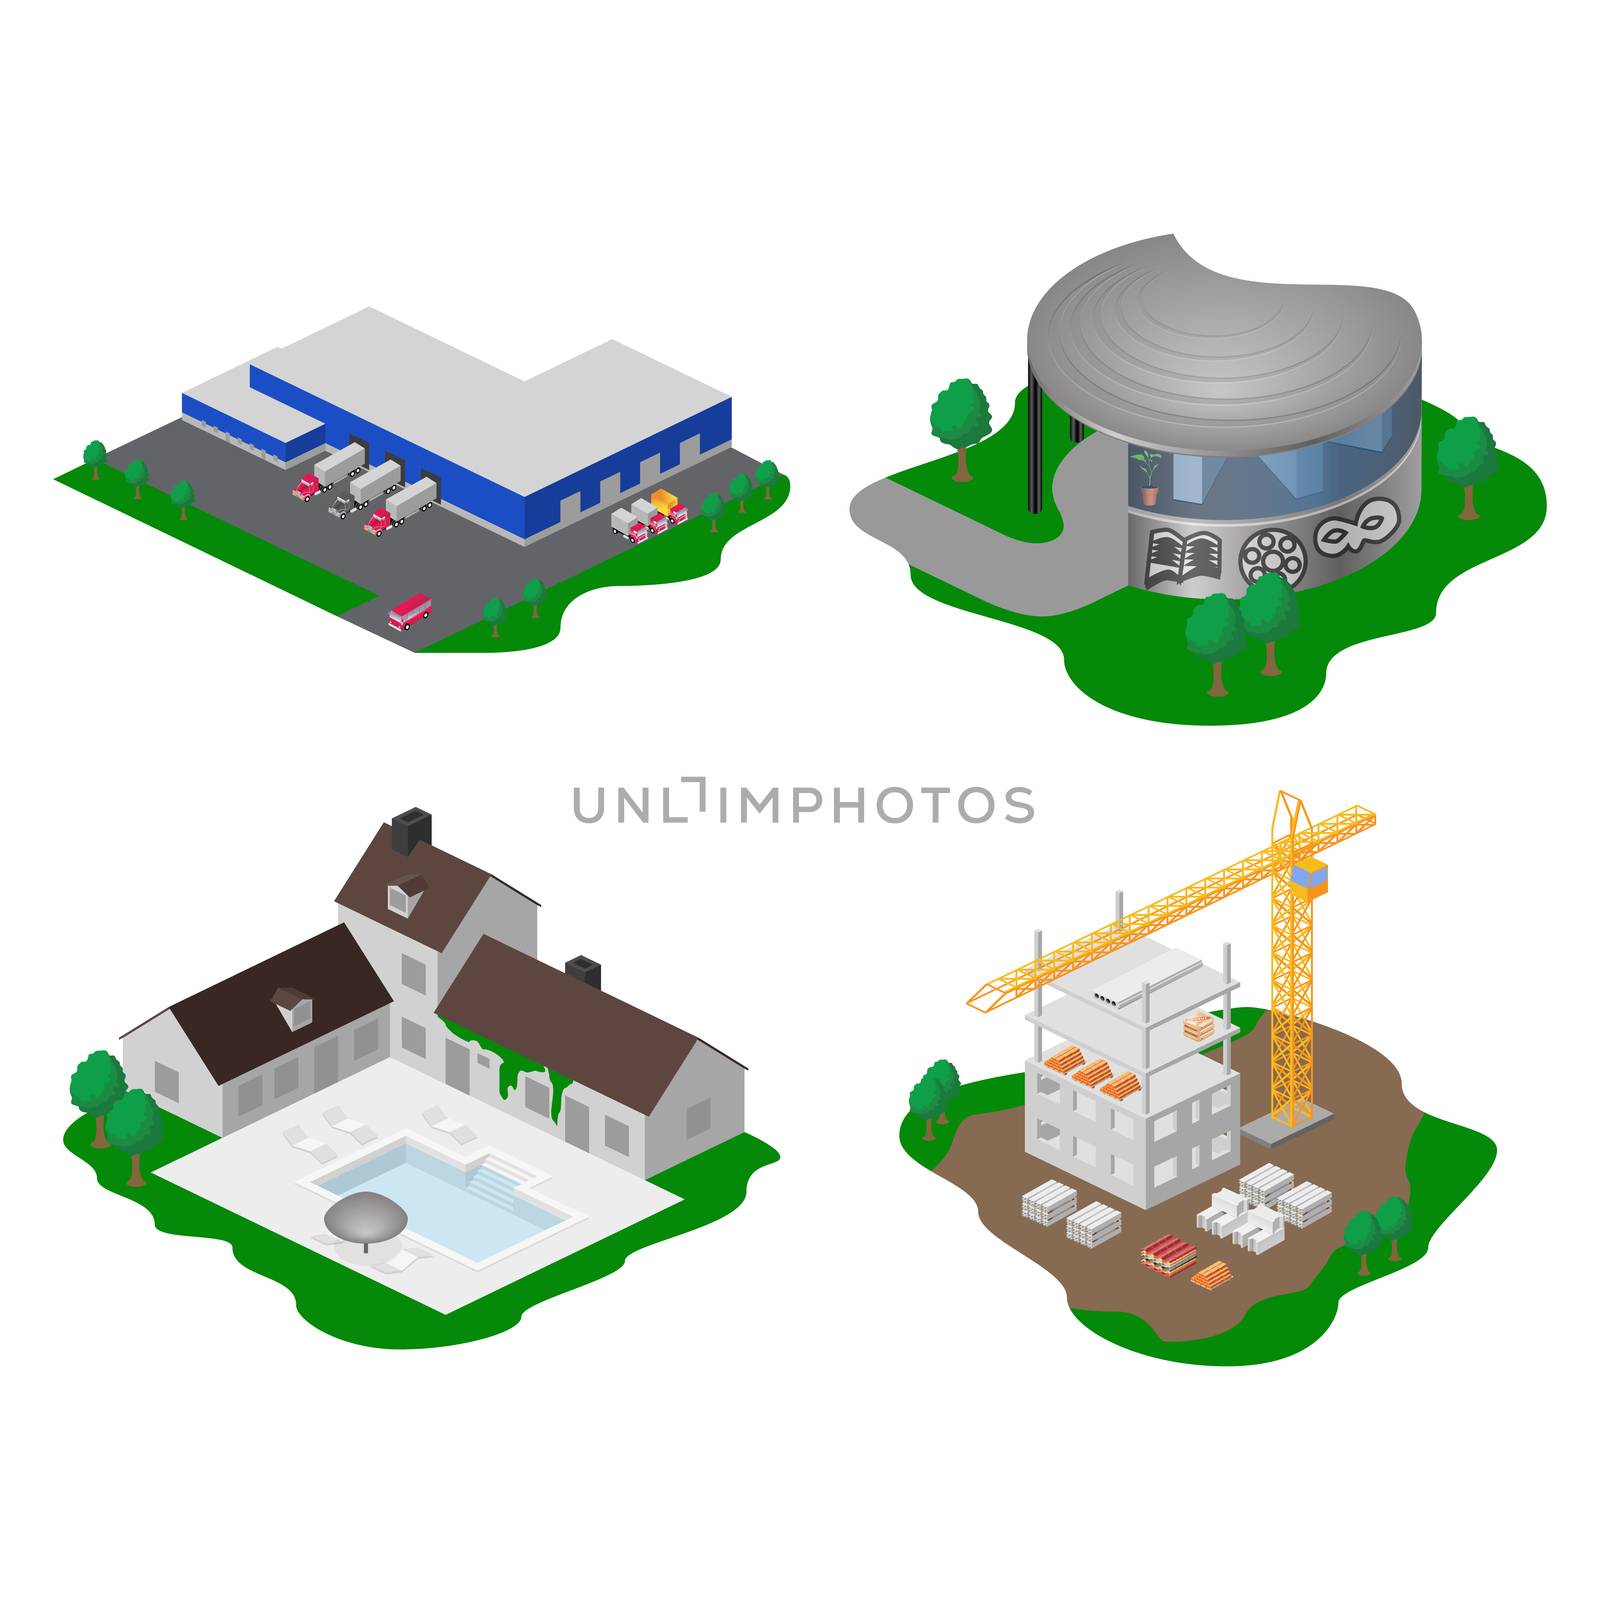 Architecture concepts. Isolated objects on a white background.